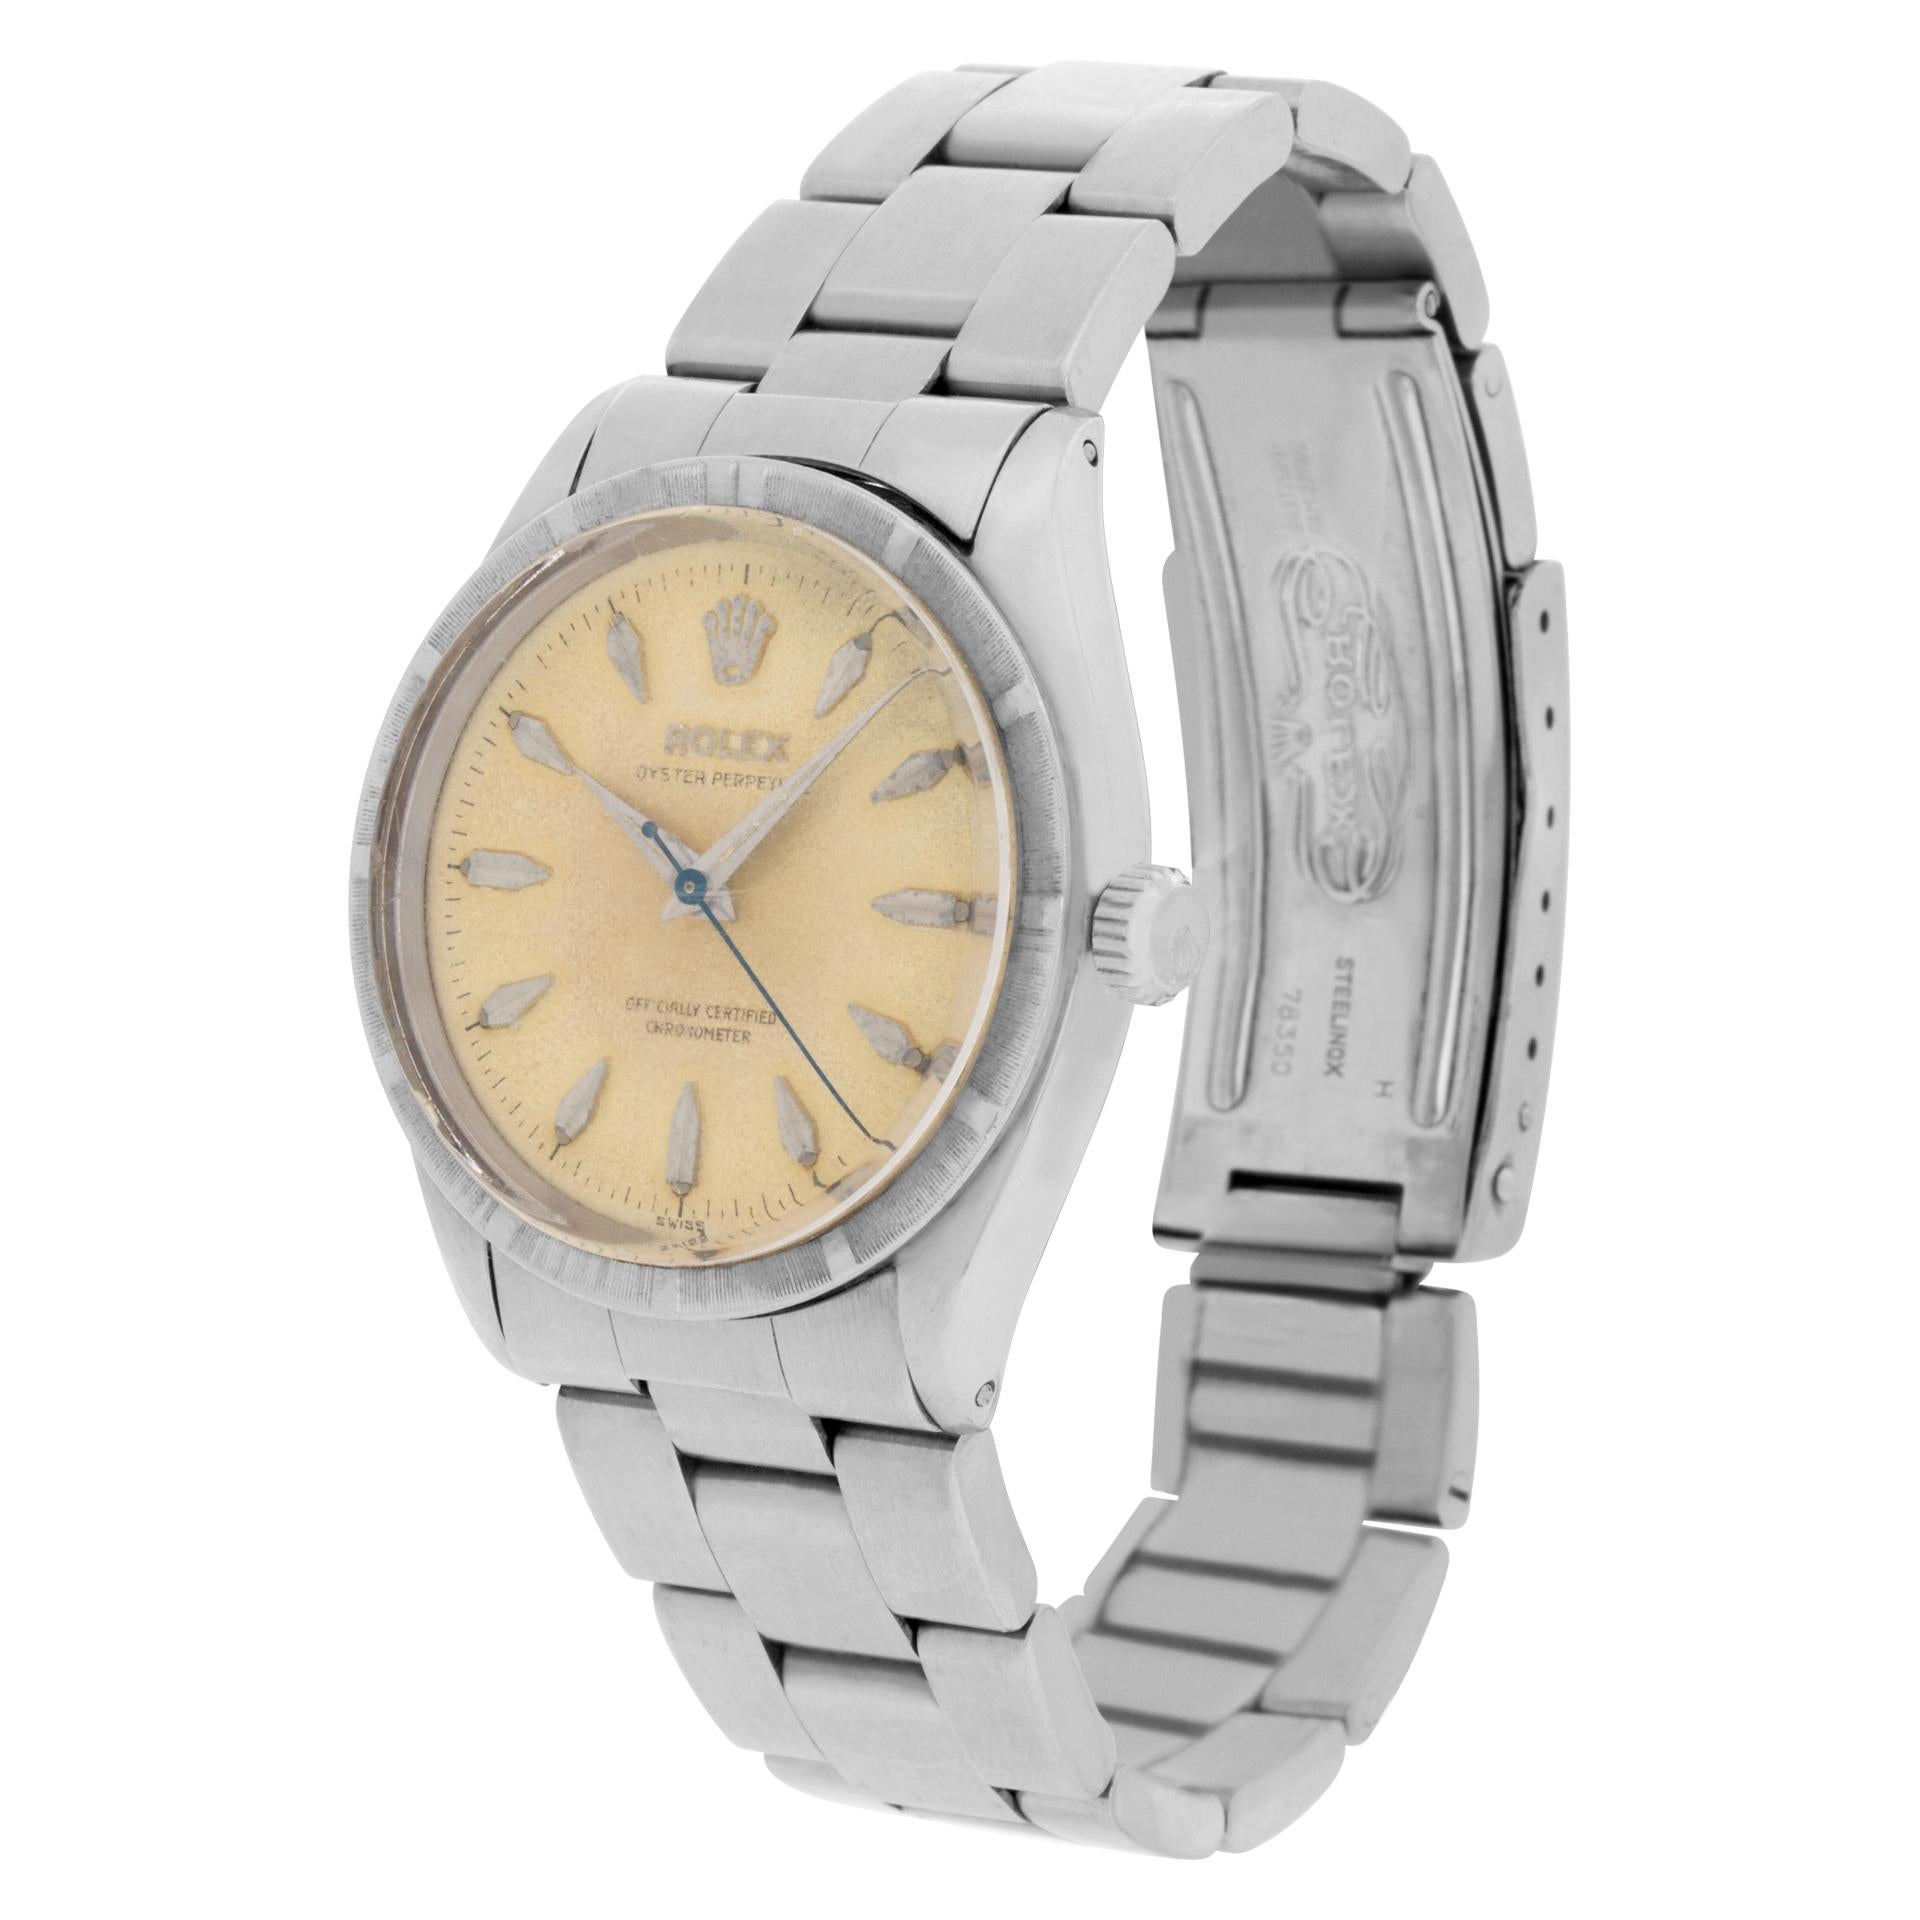 Vintage Rolex Oyster Perpetual with engine-turned bezel with cream dial & baton hour markers. Auto w/ sweep seconds. 34 mm case size. Ref 6569. Circa 1943. **Bank Wire Only at this price** Fine Pre-owned Rolex Watch.

Certified preowned Vintage